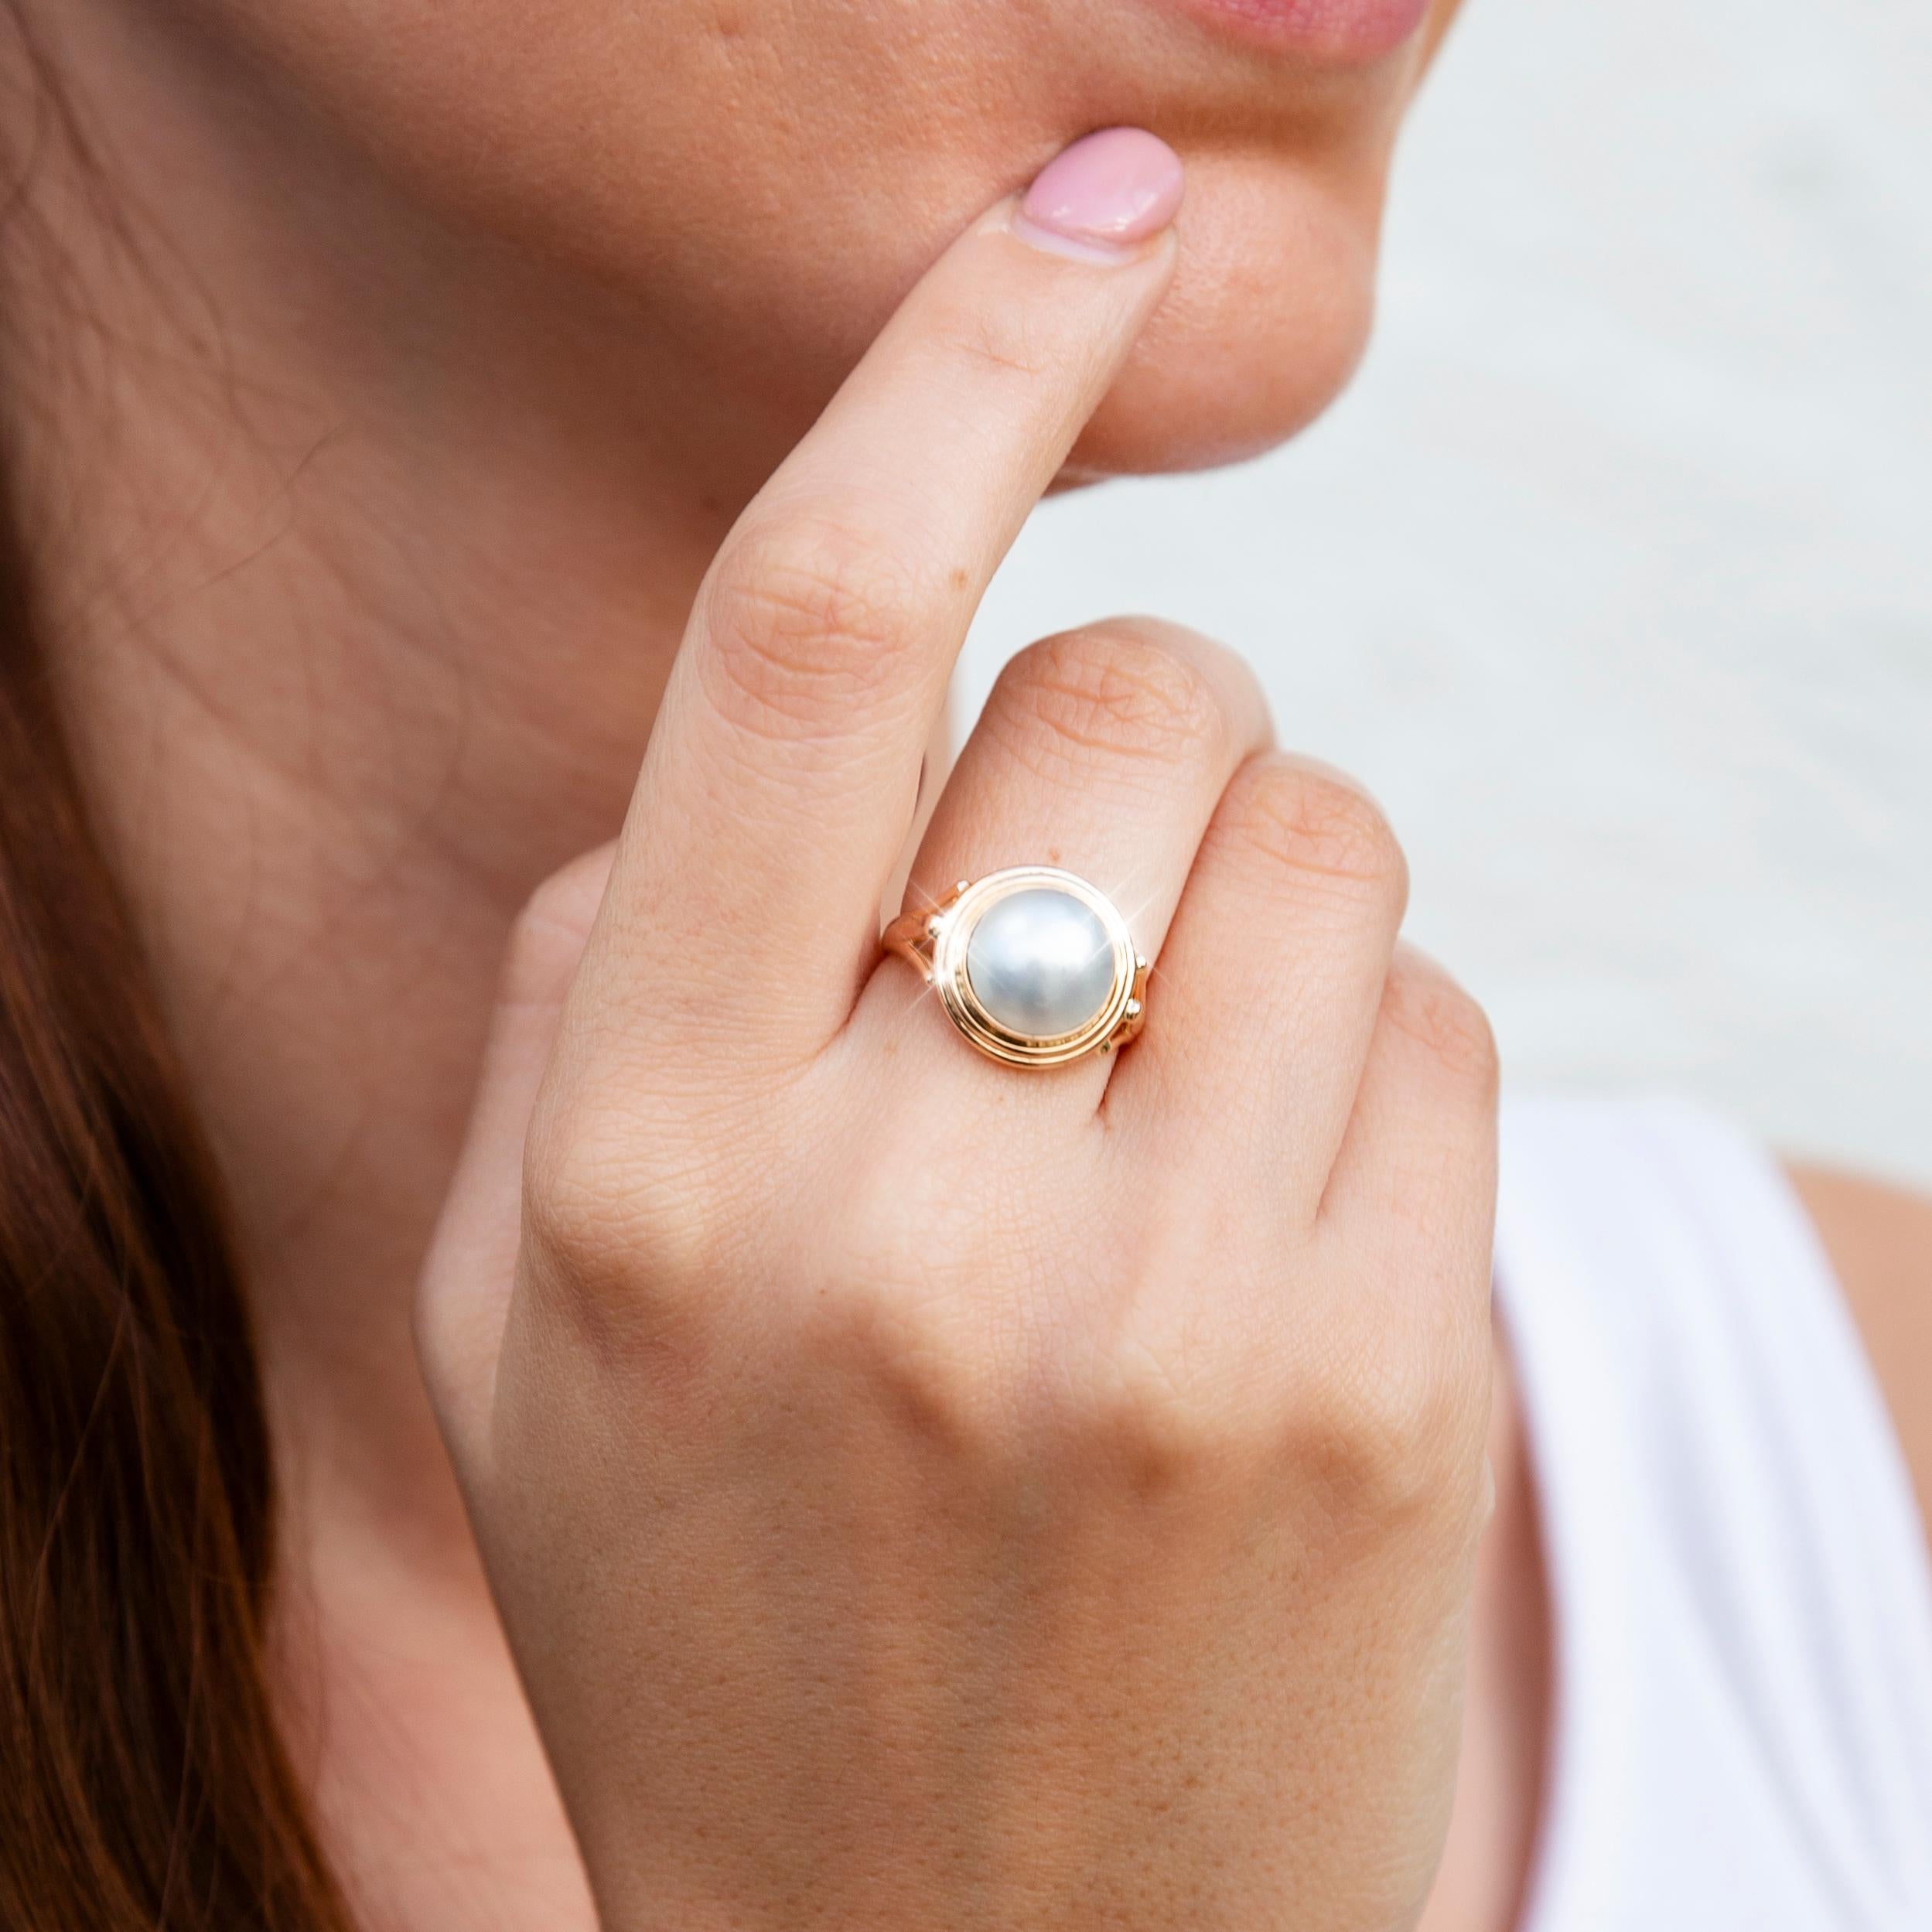 Forged in 9 carat yellow gold, this darling vintage ring features an alluring mabe pearl in a minimalistic rub over setting. We have named her The Elenore Ring. Her endearing design transitions seamlessly from day into evening, making her a